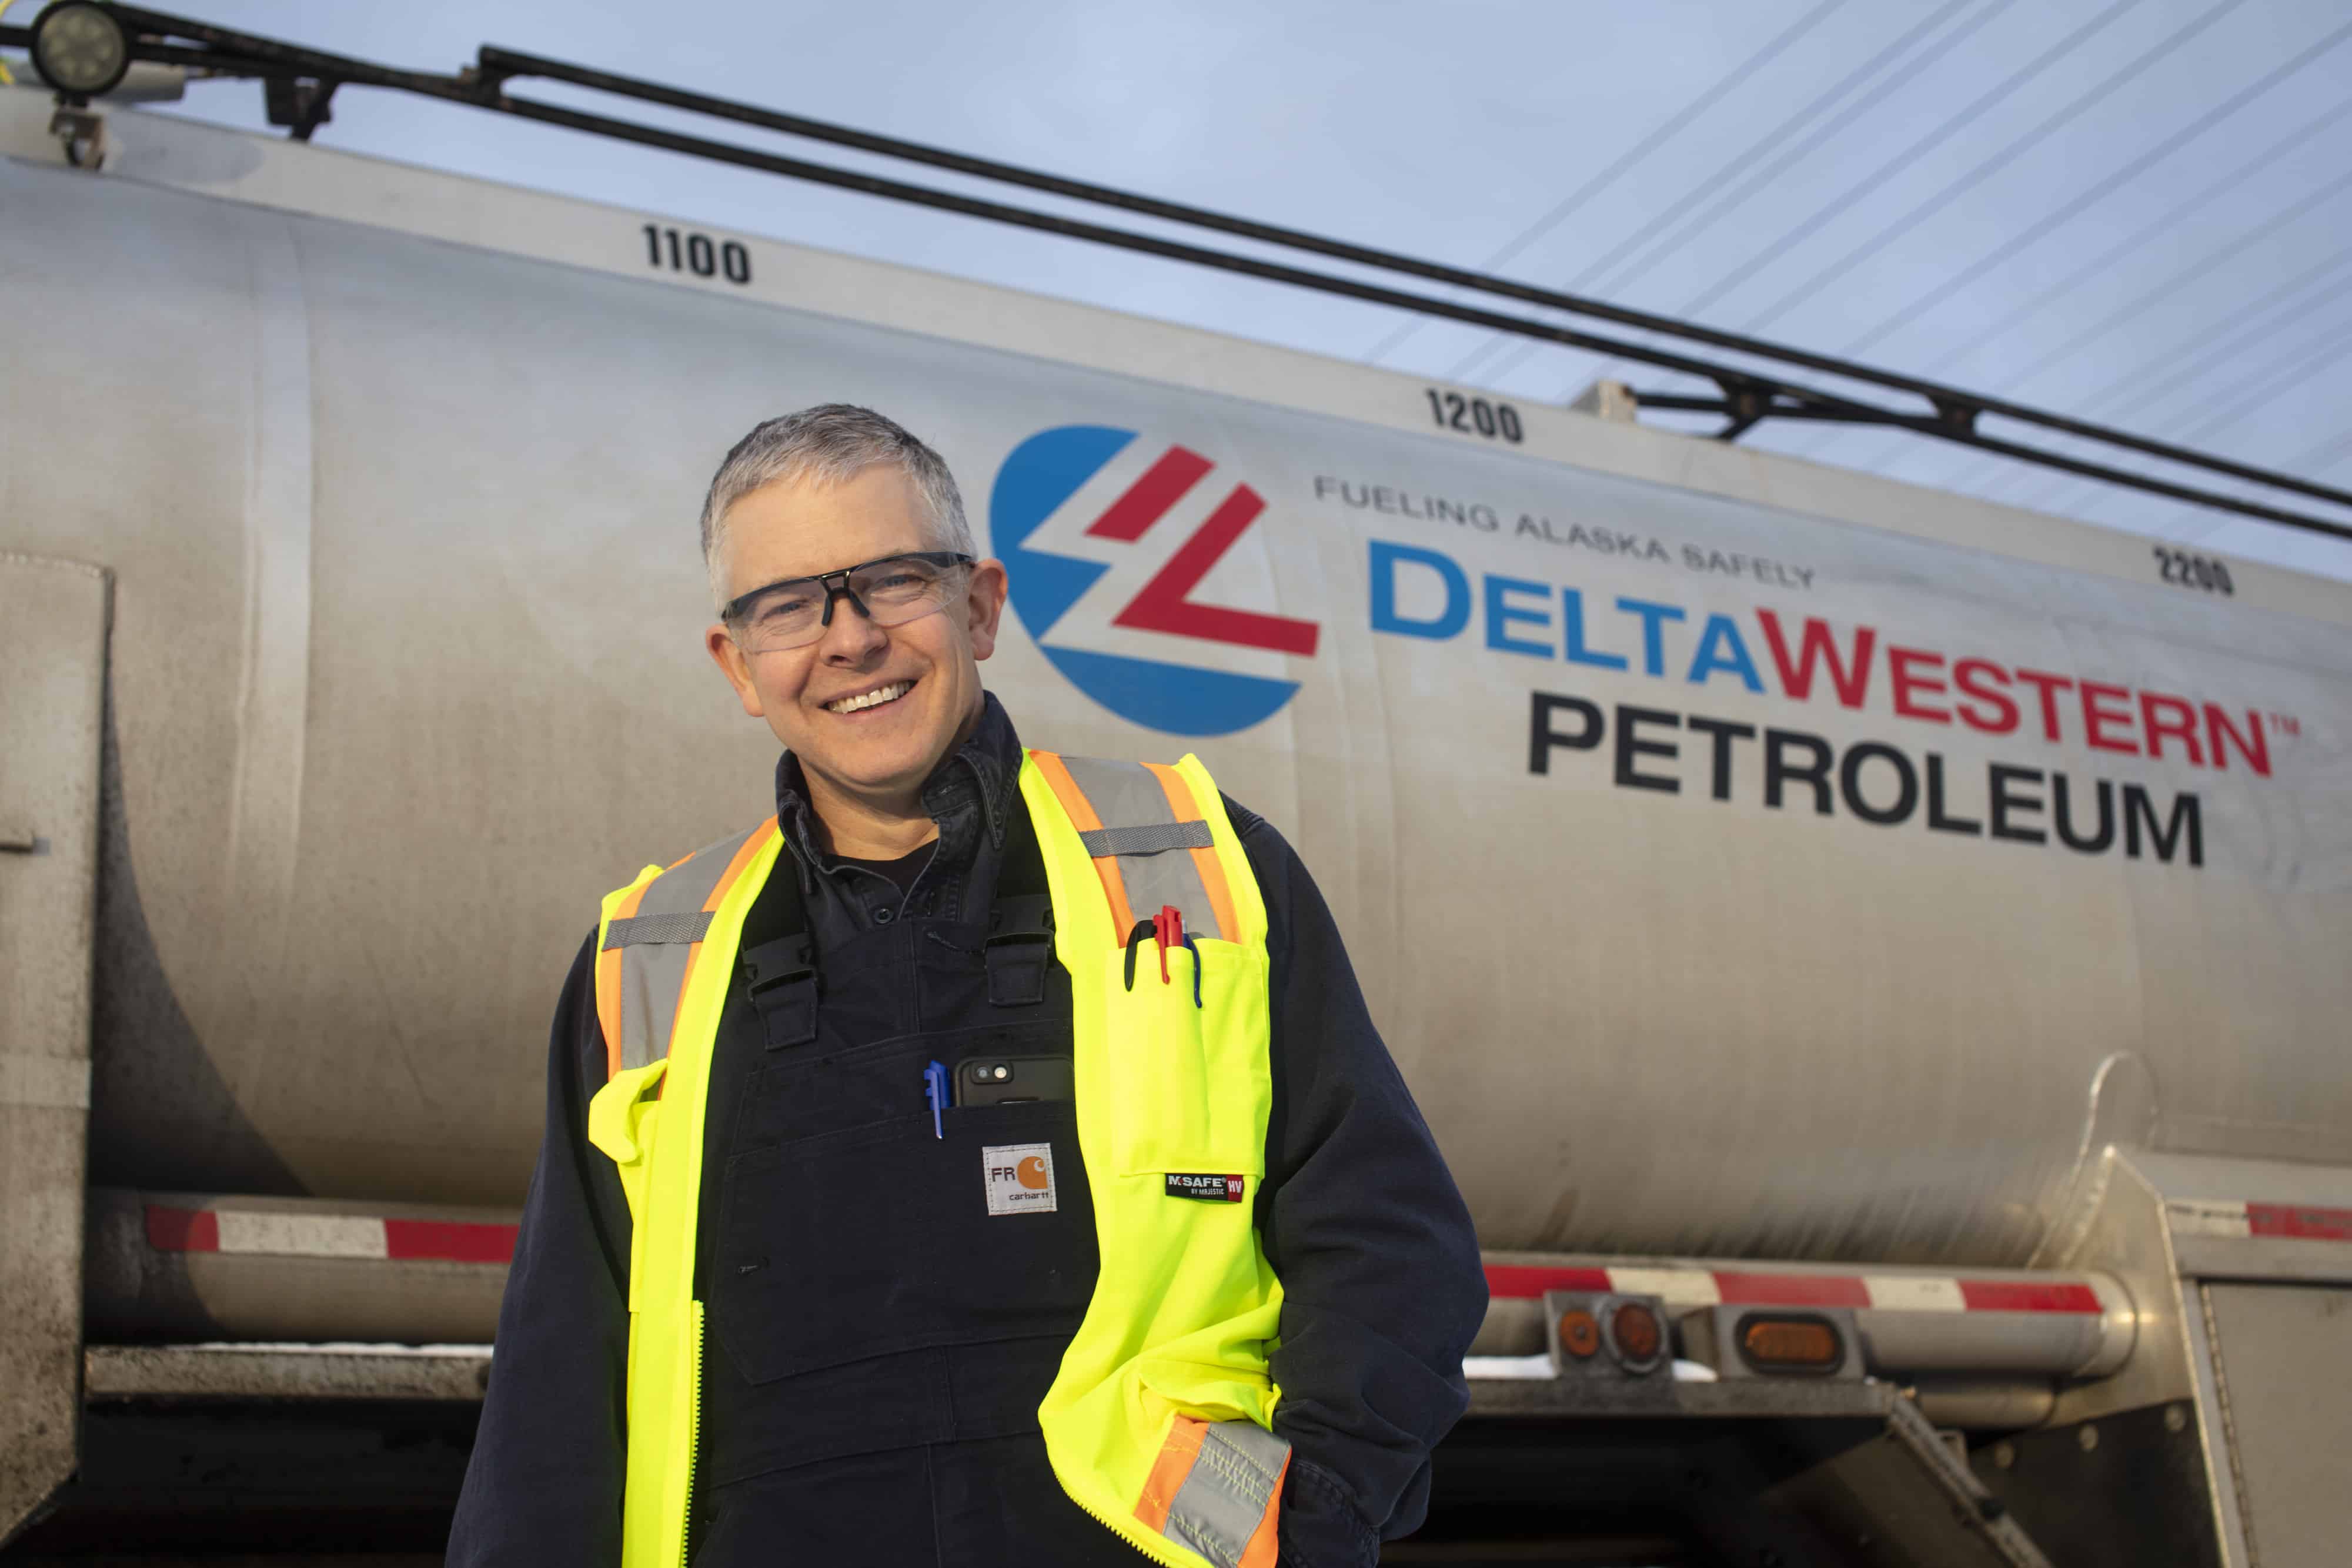 Deniss poses in front of a Delta Western Petroleum.